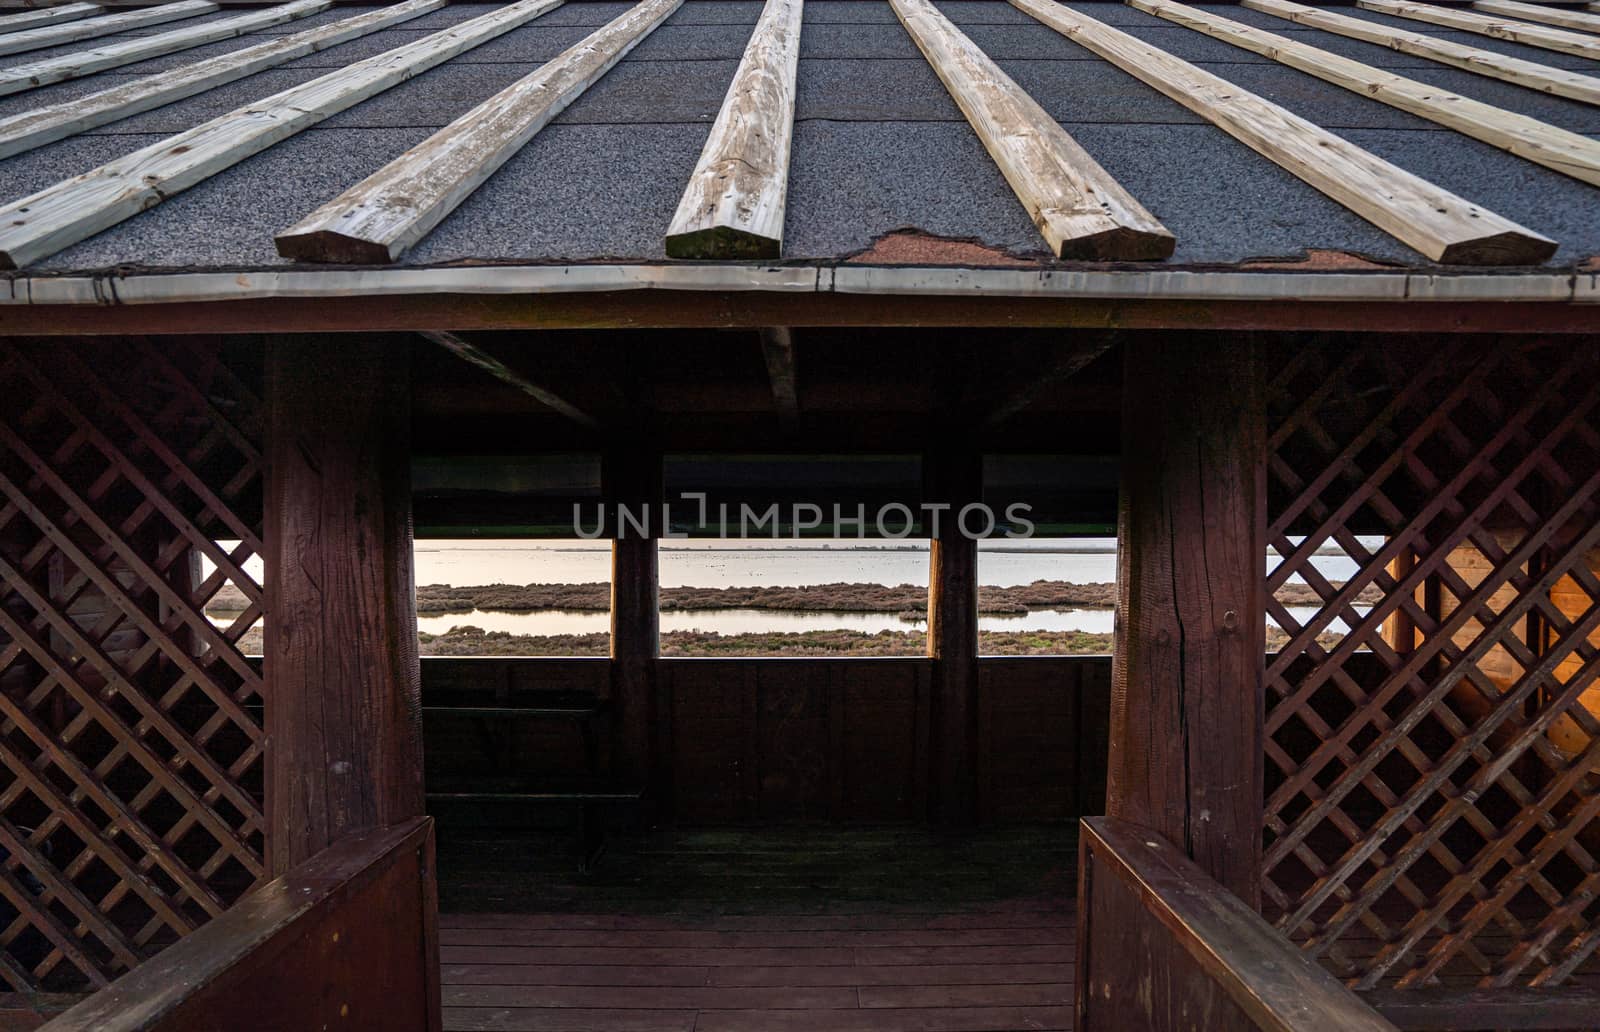 Wooden cabin for bird watching in the Ebro river delta, Spain by tanaonte